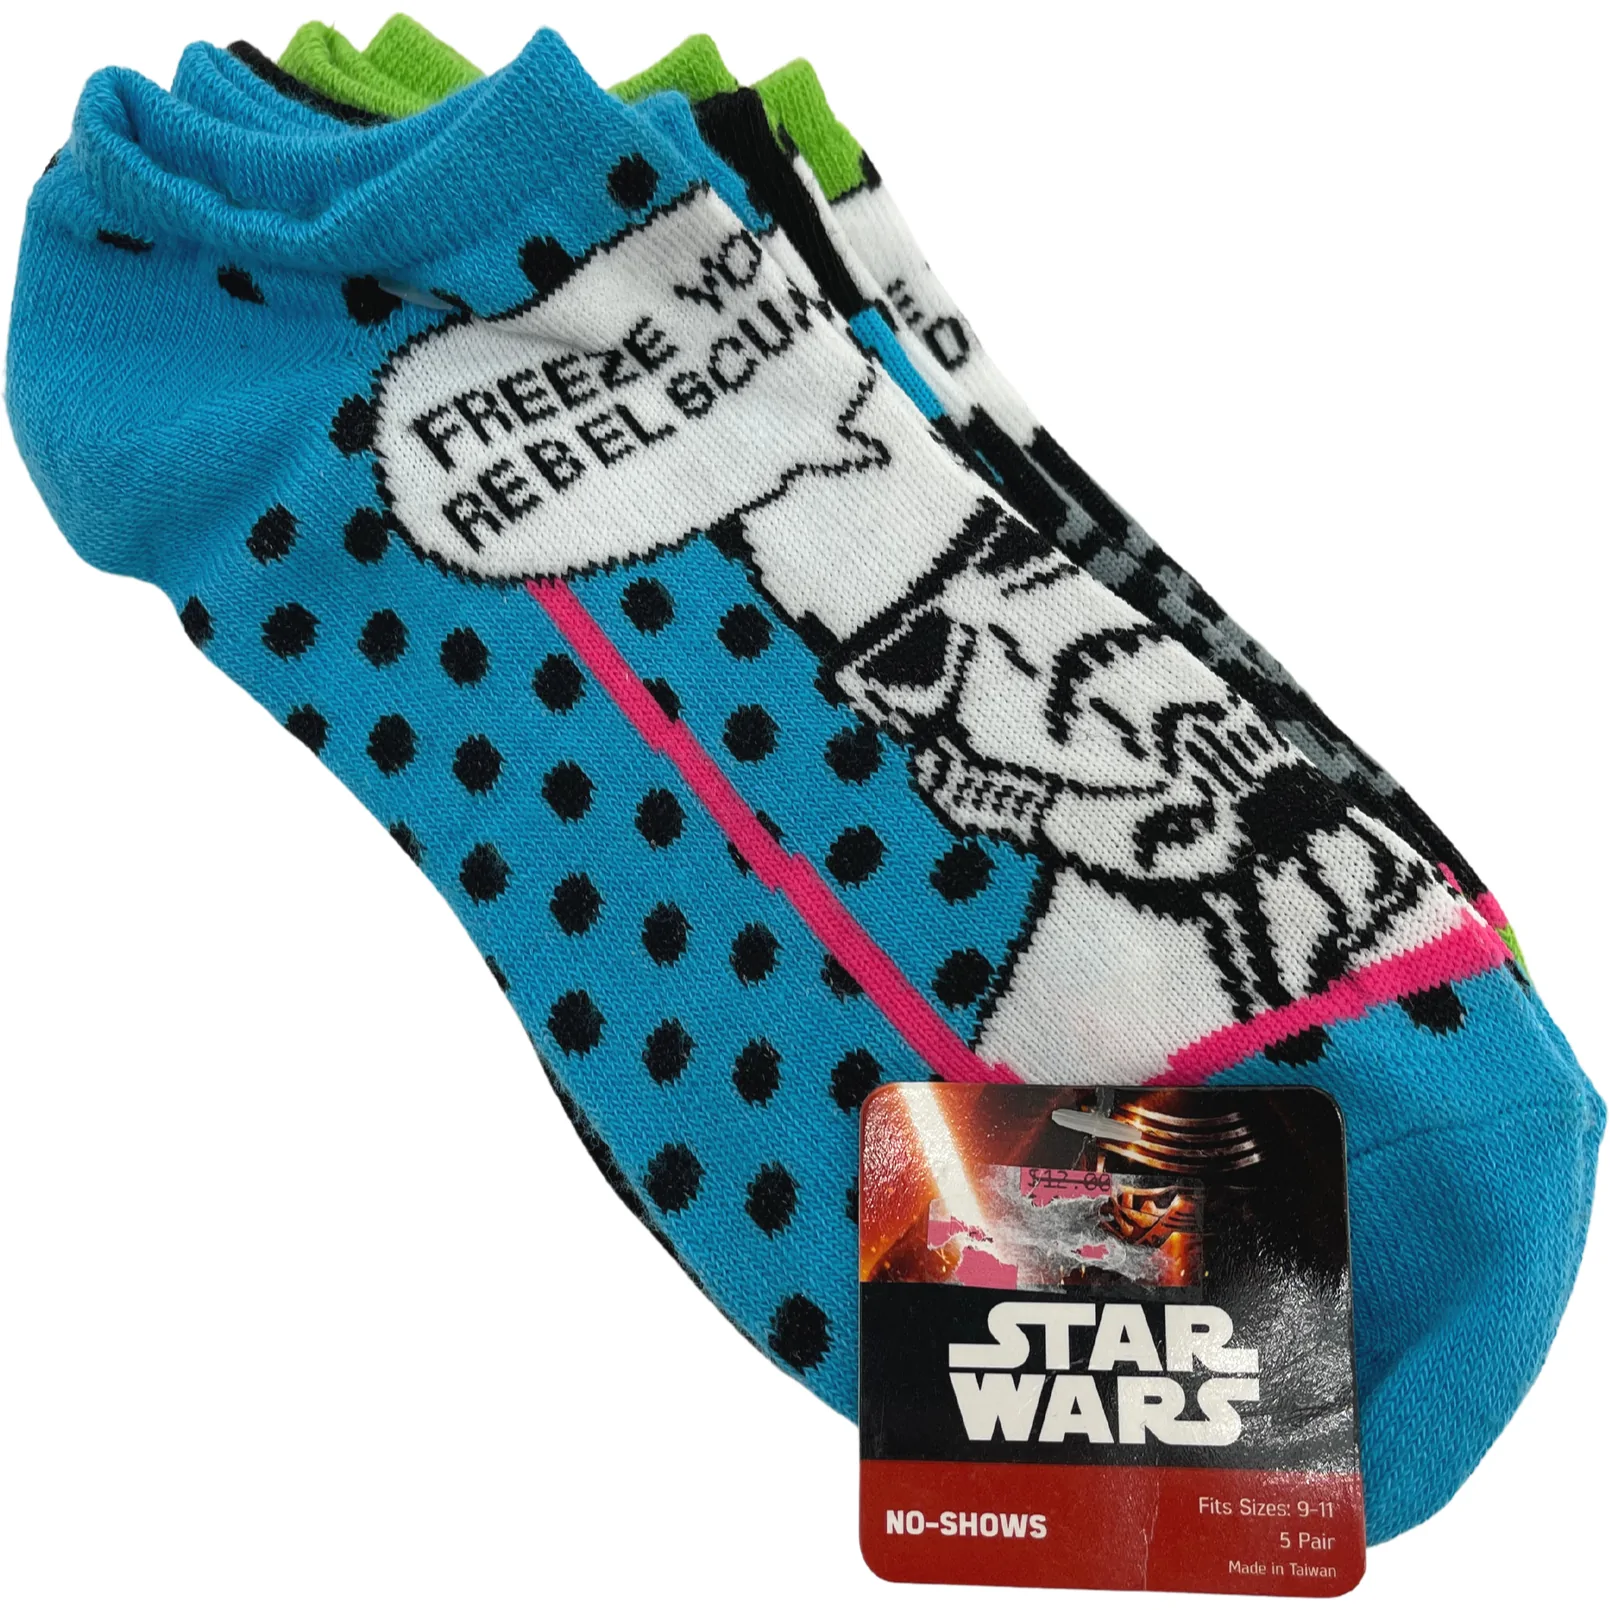 Star Wars Women's Socks / No Show Socks / 5 Pairs / Multicolour Pack / Shoe Size 9-11 **No Tags**